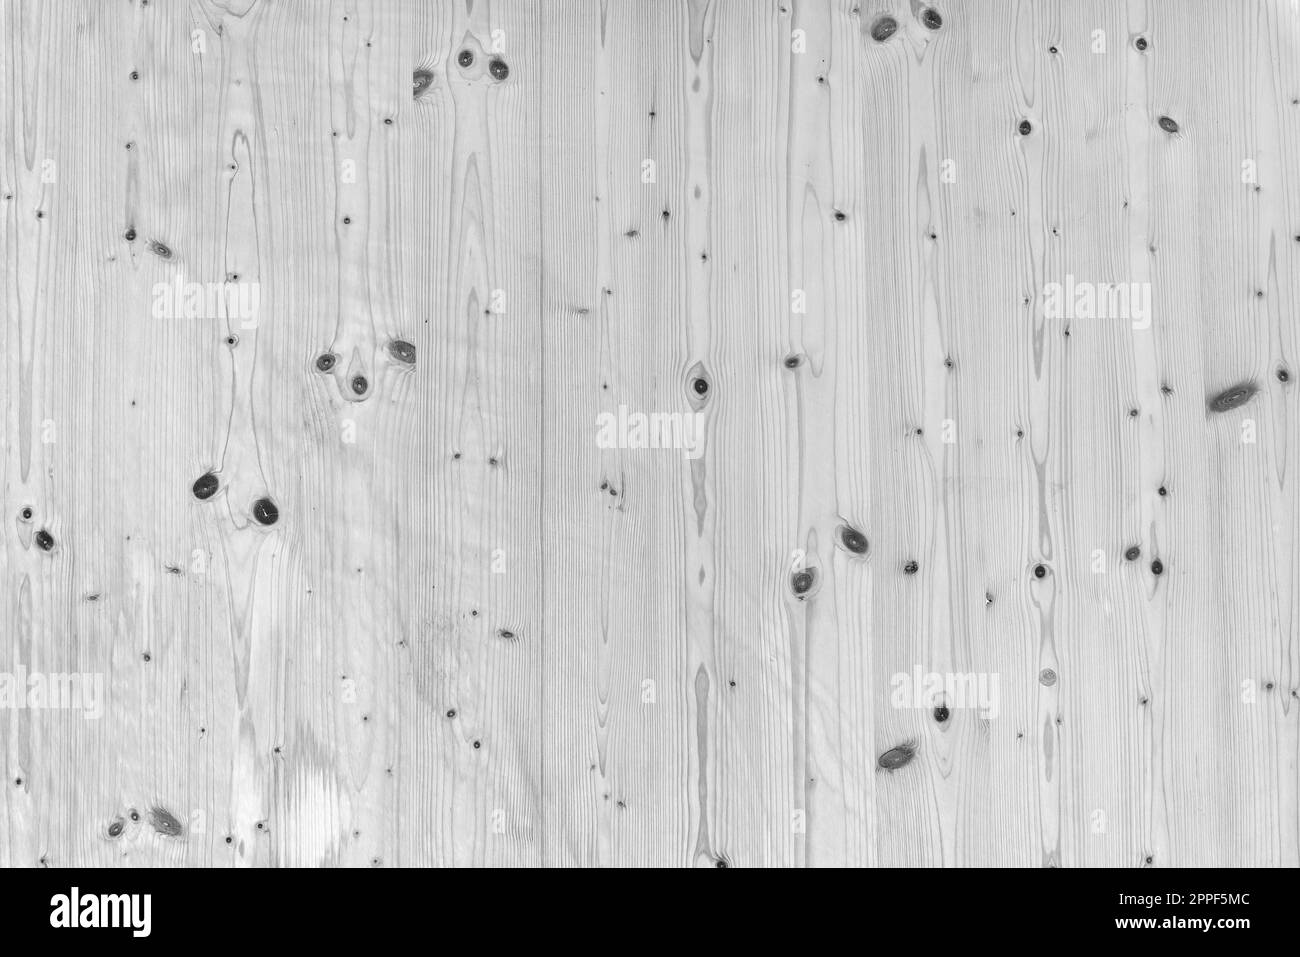 Black and white image of pinewood board surface, top view Stock Photo